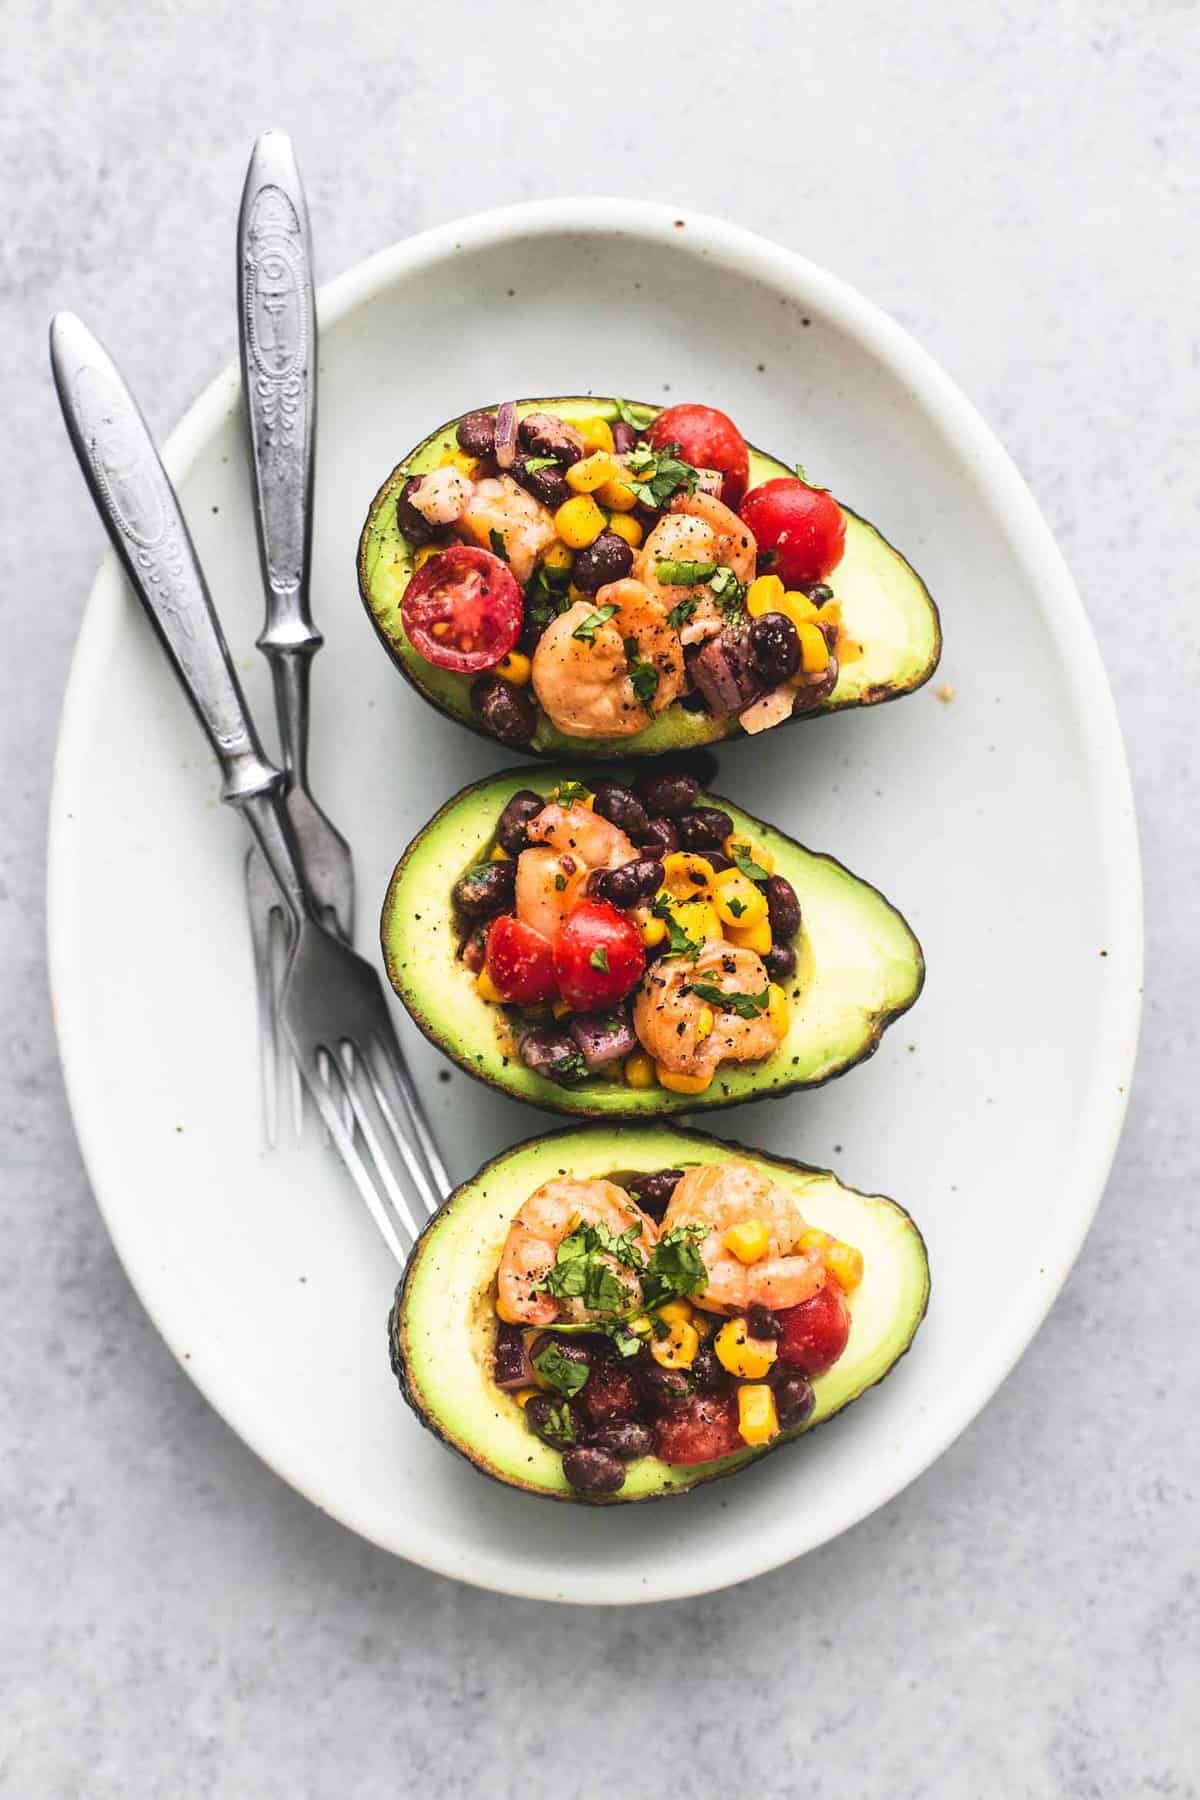 top view of Southwest shrimp salad stuffed avocados with forks on a plate.